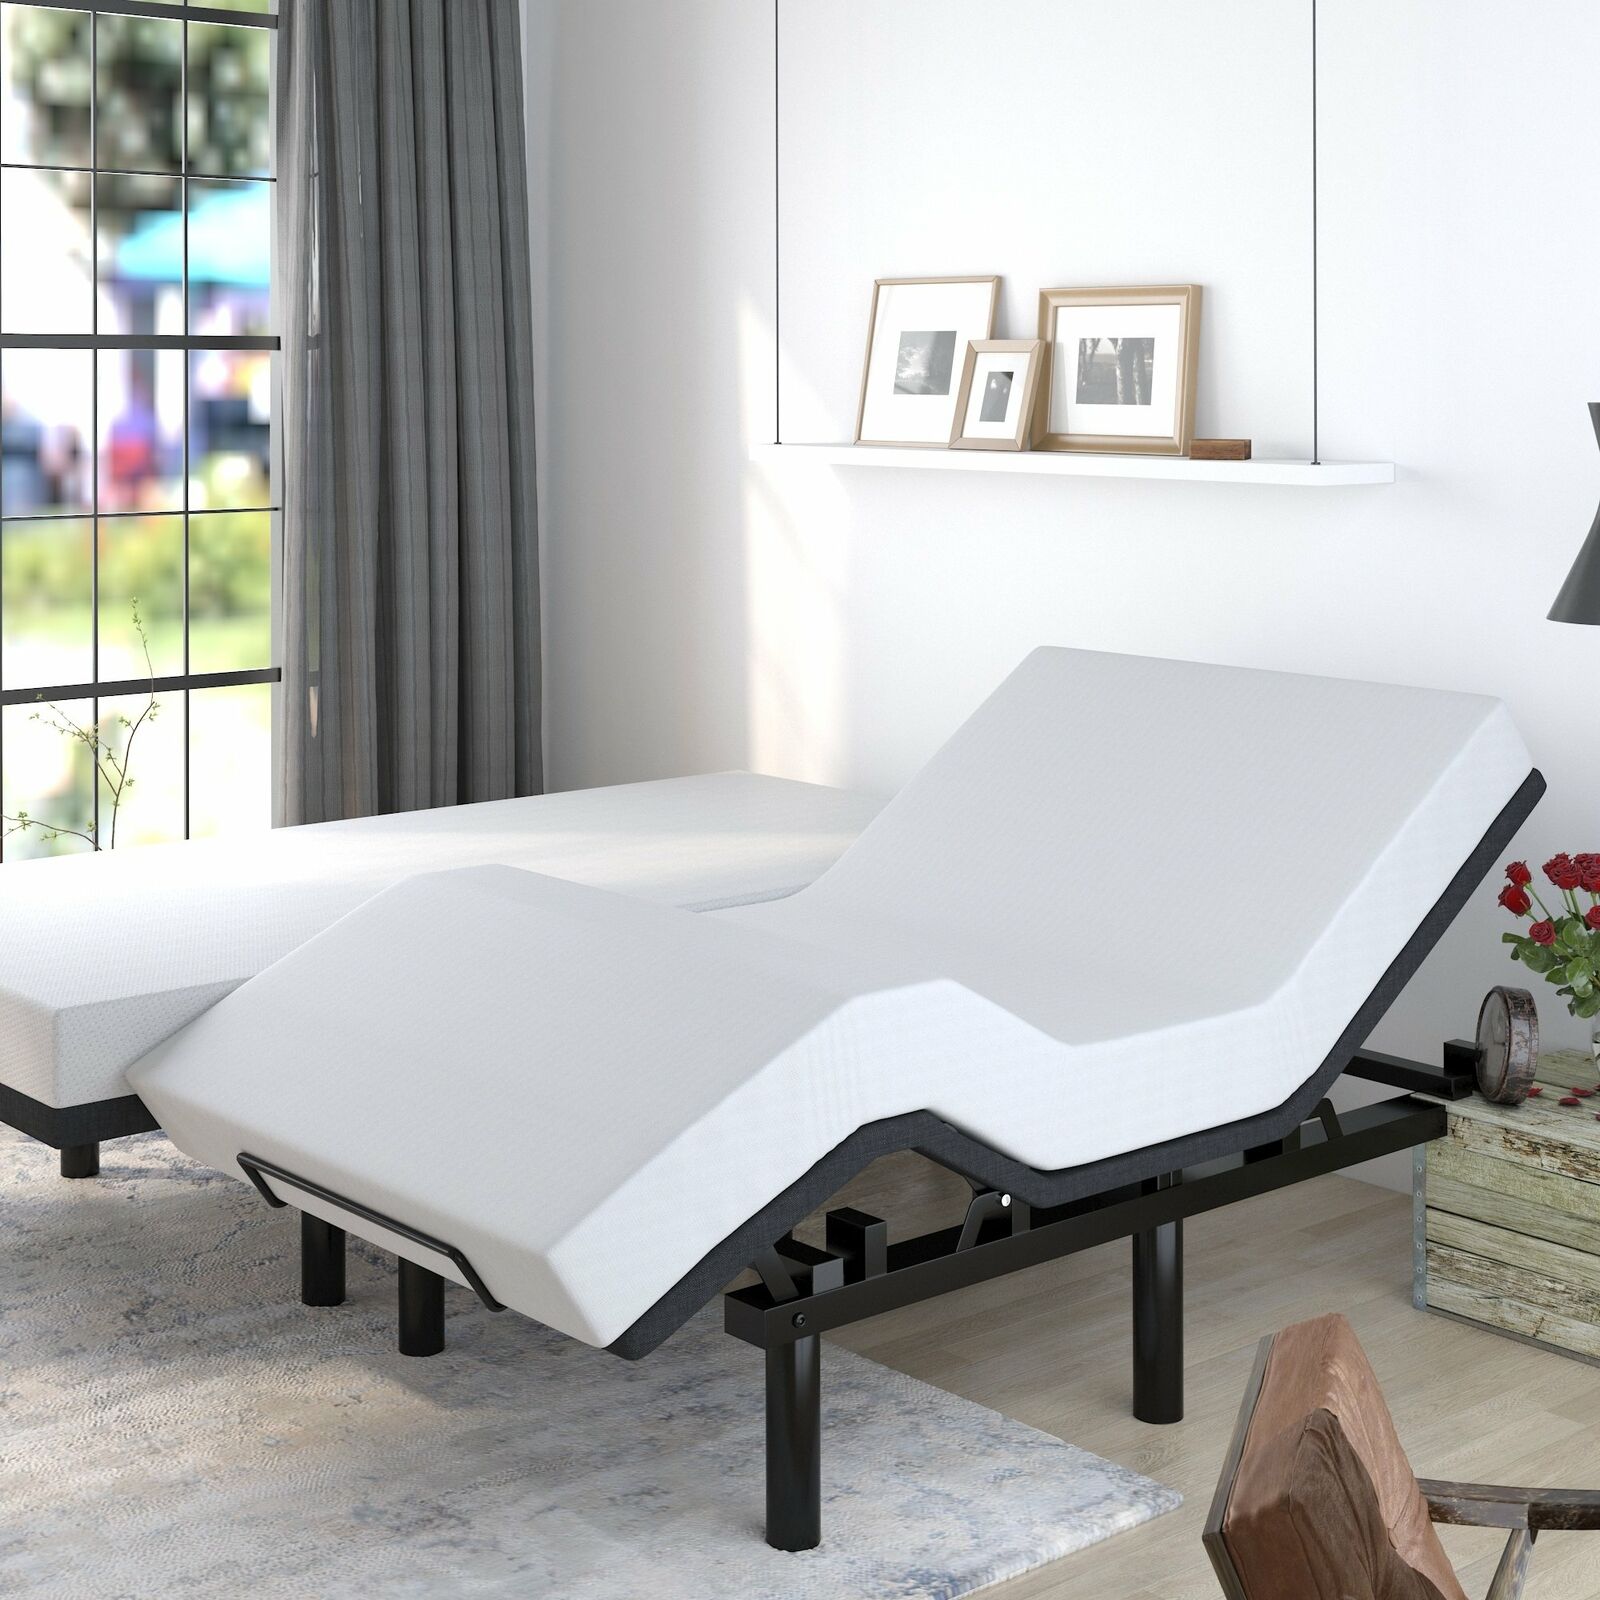 Split King Size Adjustable Bed Base, Motorized Head and Foot Incline, Only Base Sifurni SBB022-4